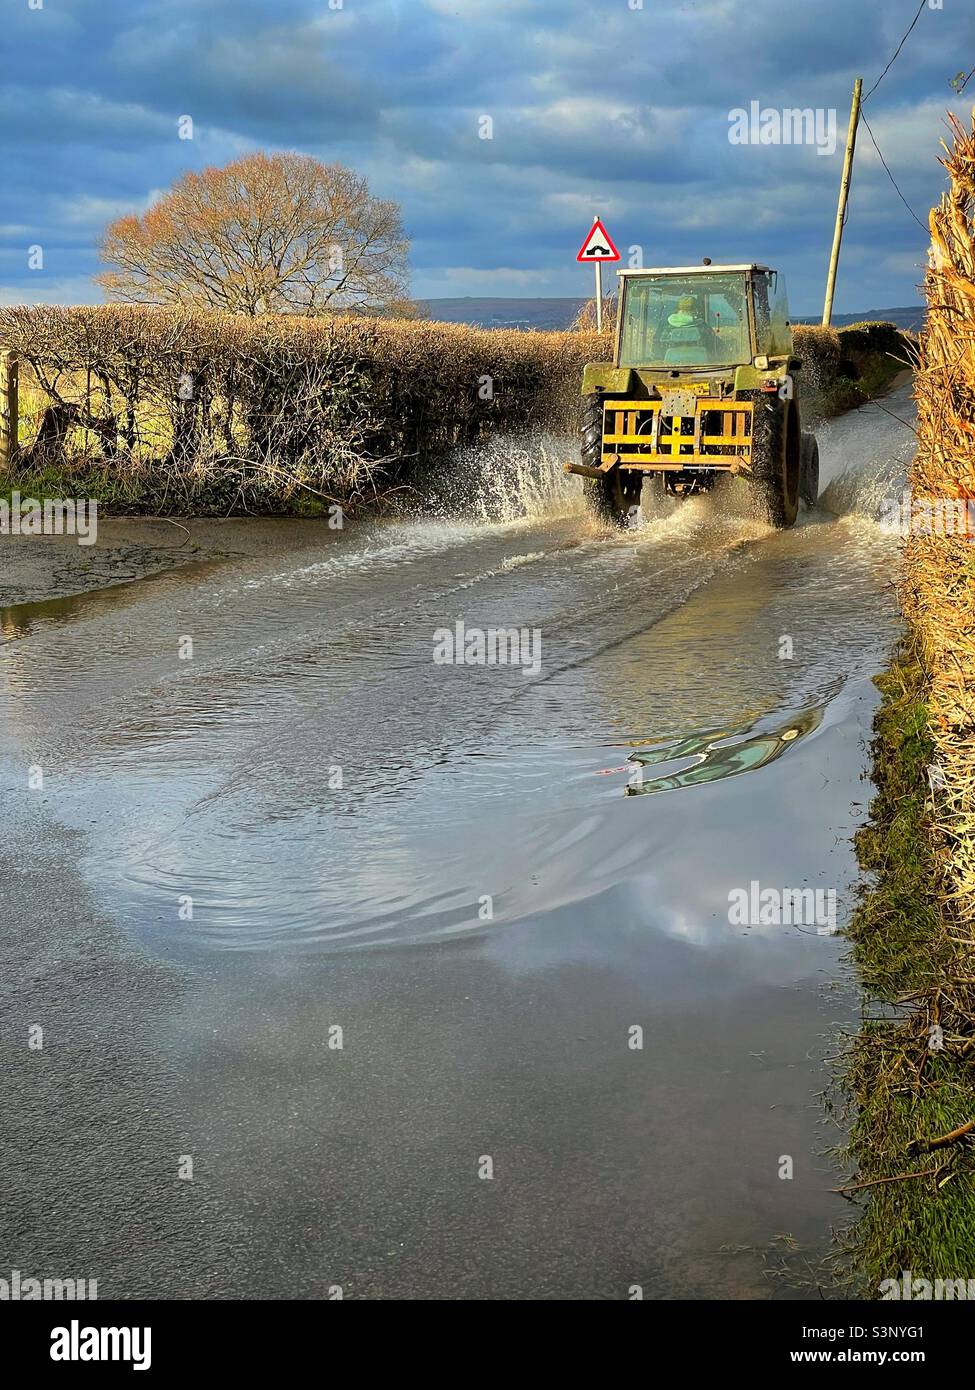 Tractor driving through a flooded country lane, South Wales, March. Stock Photo